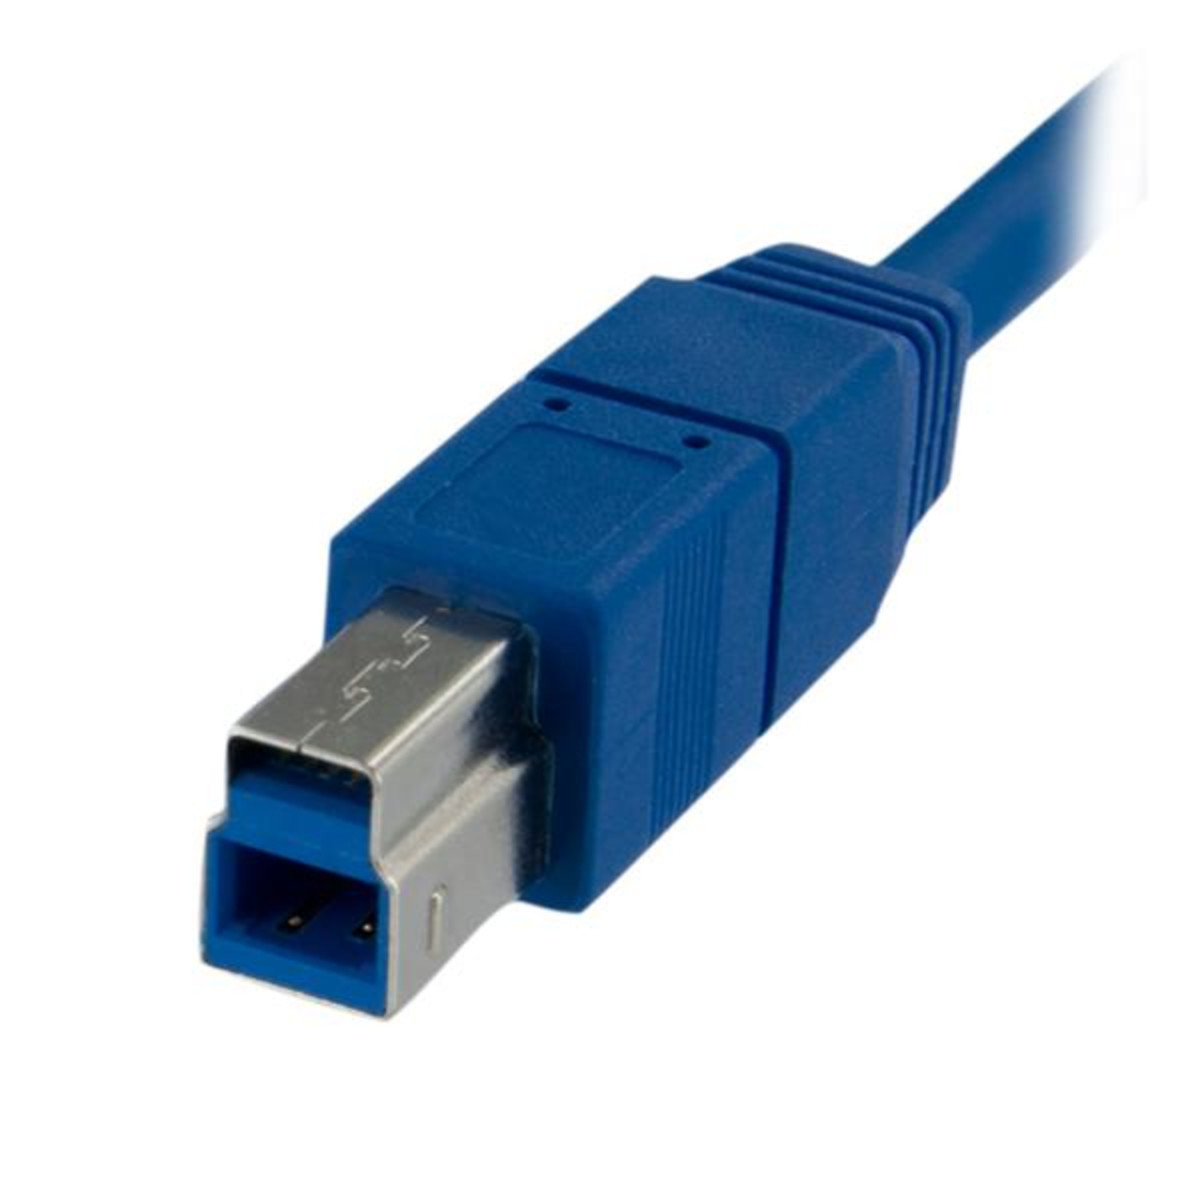 1m SuperSpeed USB 3.0 Cable A to B - M/M